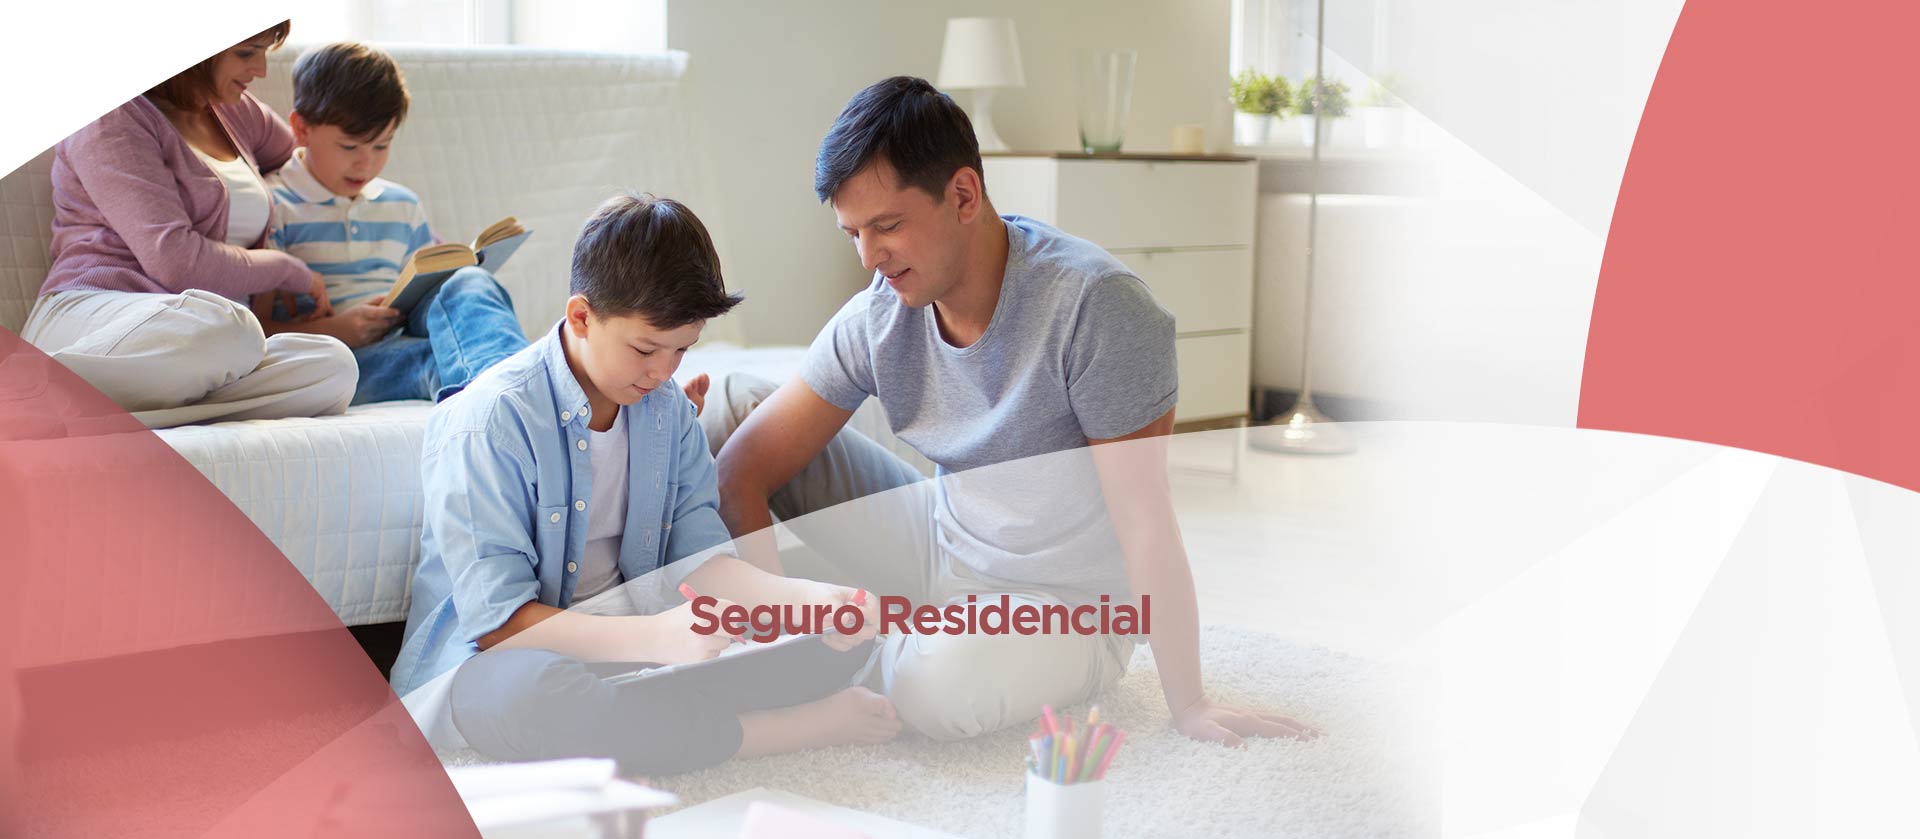 Page Residencial